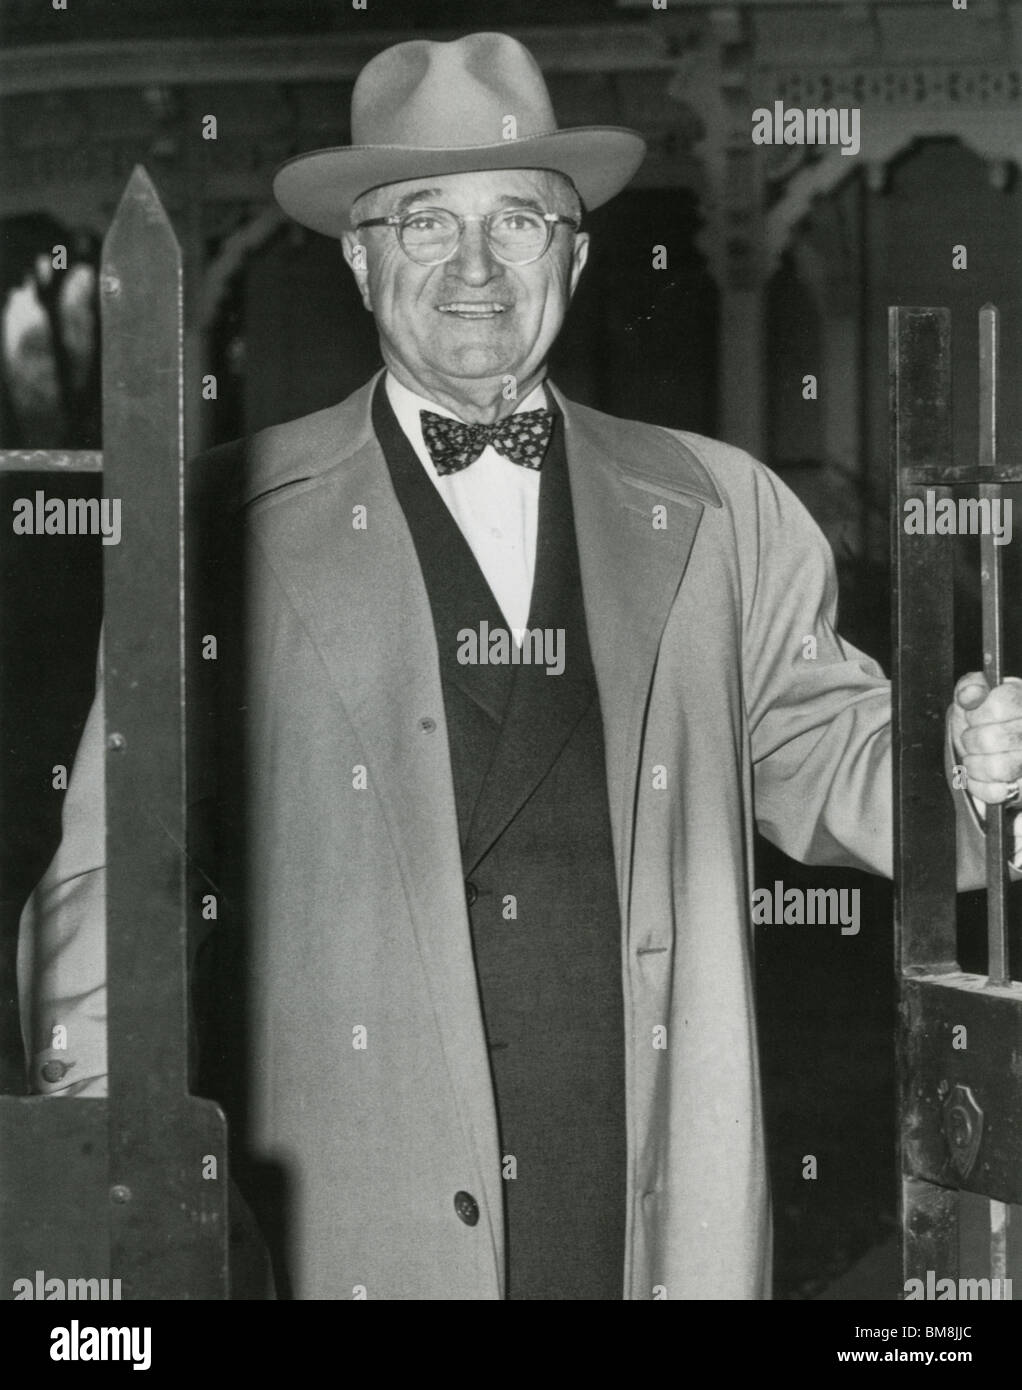 HARRY S TRUMAN - 33rd President of the USA (1884-1972) Stock Photo